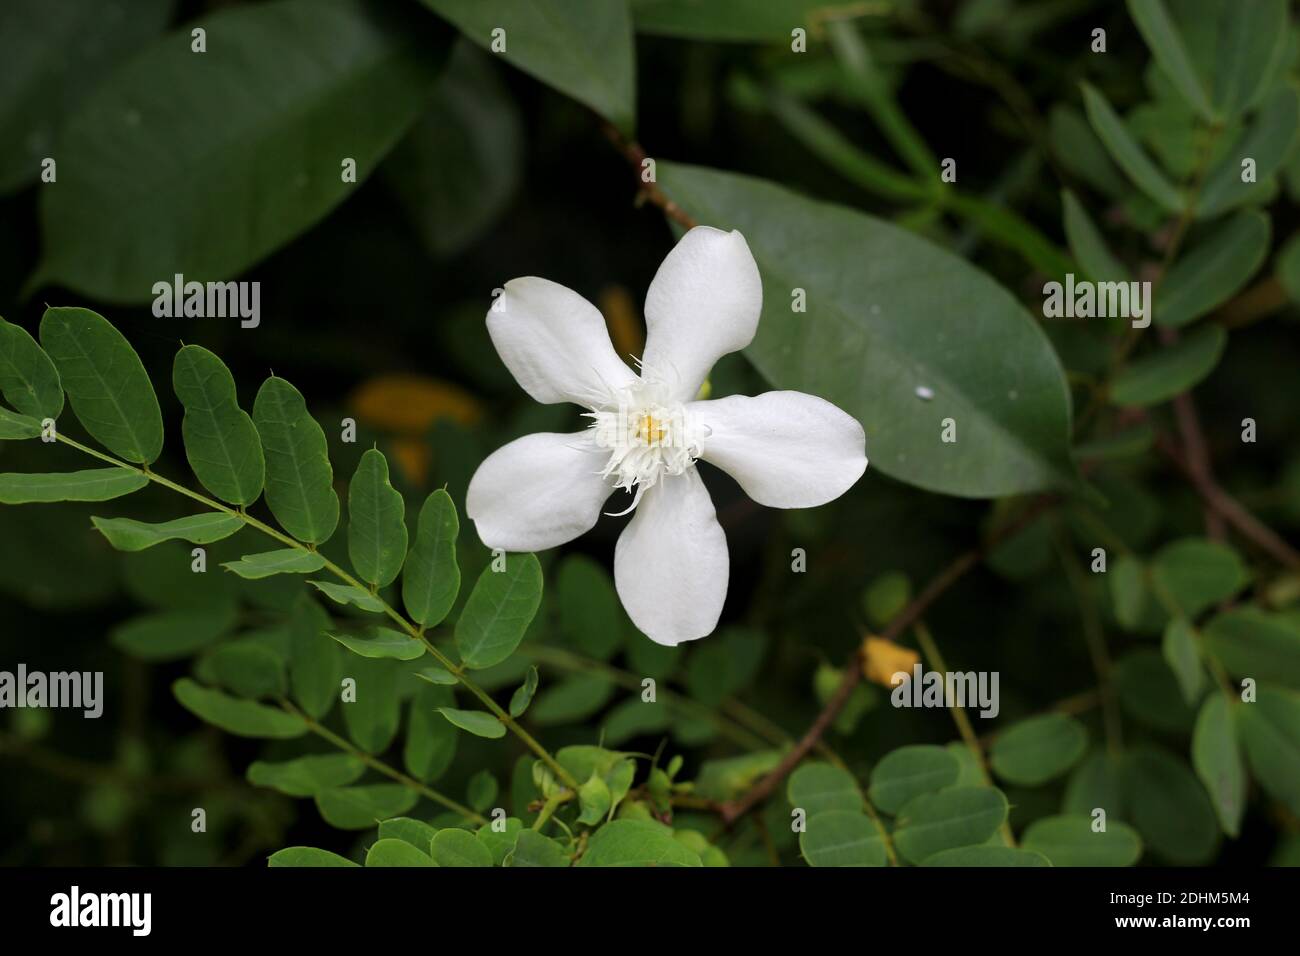 White flower in green leaves background Stock Photo